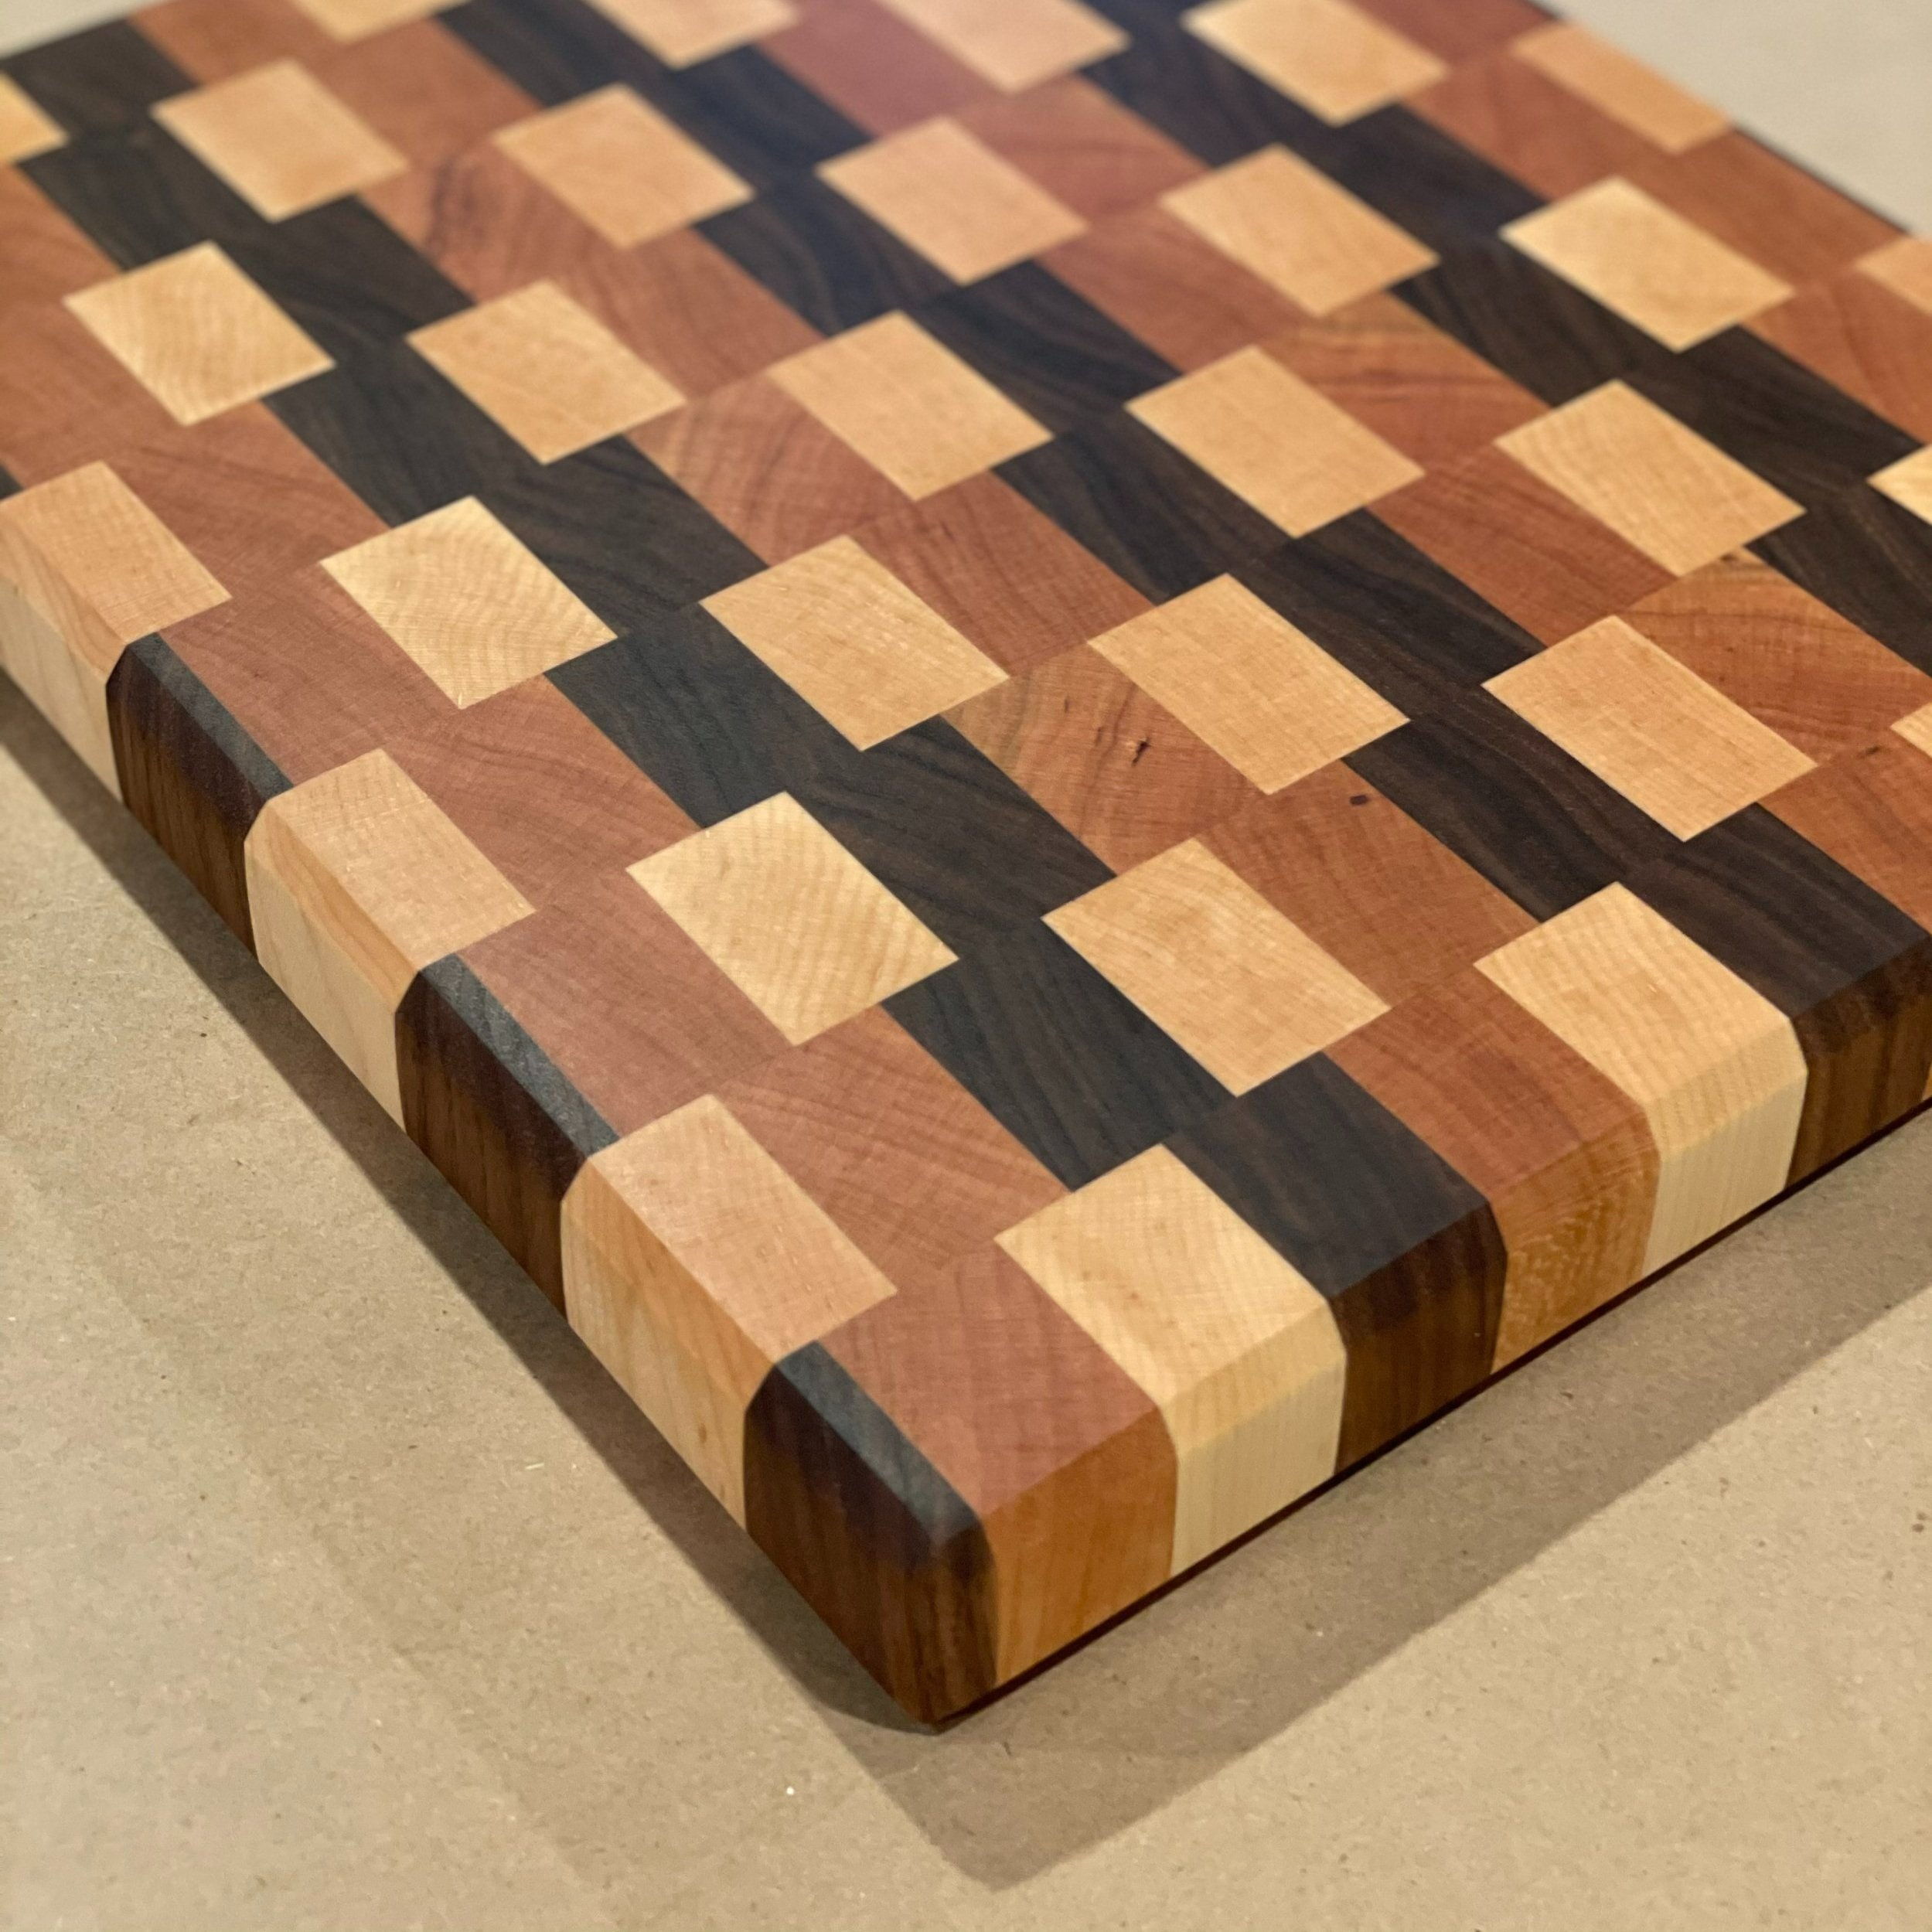 How to Care for Cutting Boards - , Can I Put Cutting